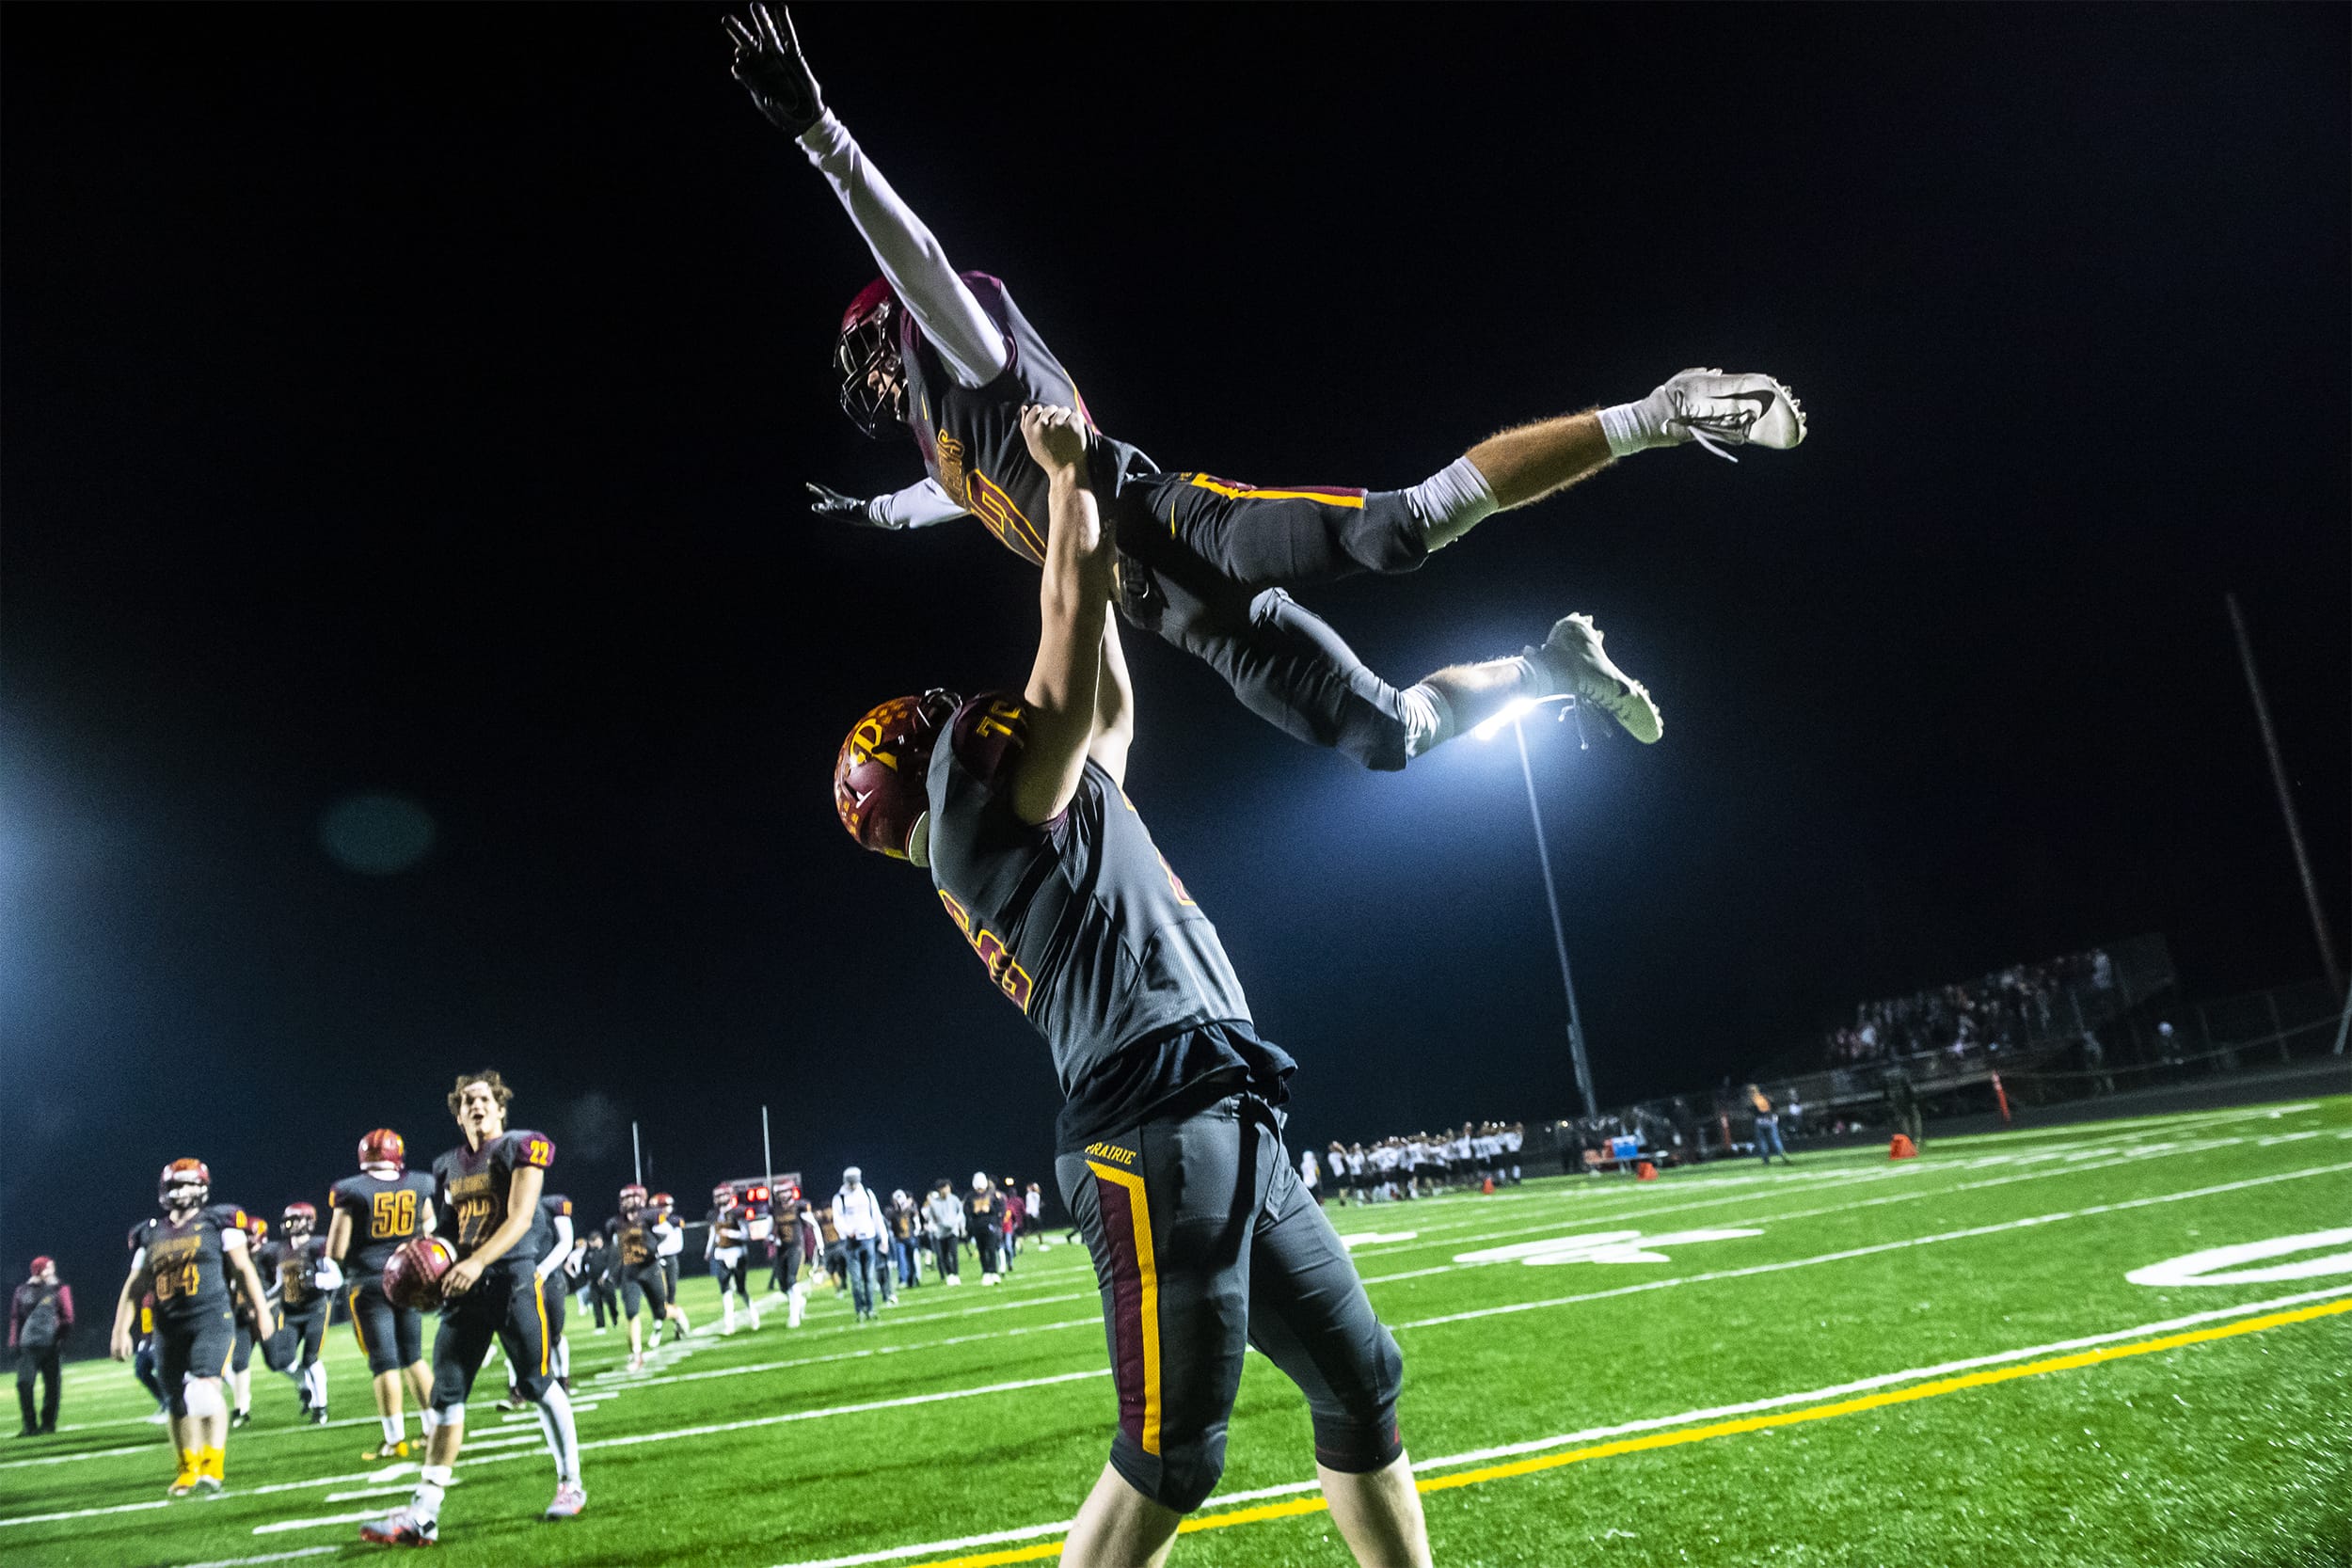 Prairie's Christian Lowry, left, and Zack Brown celebrate the Falcon's 73-35 win over the Capital Cougars at Battle Ground District Stadium on Friday night, Nov. 8, 2019.